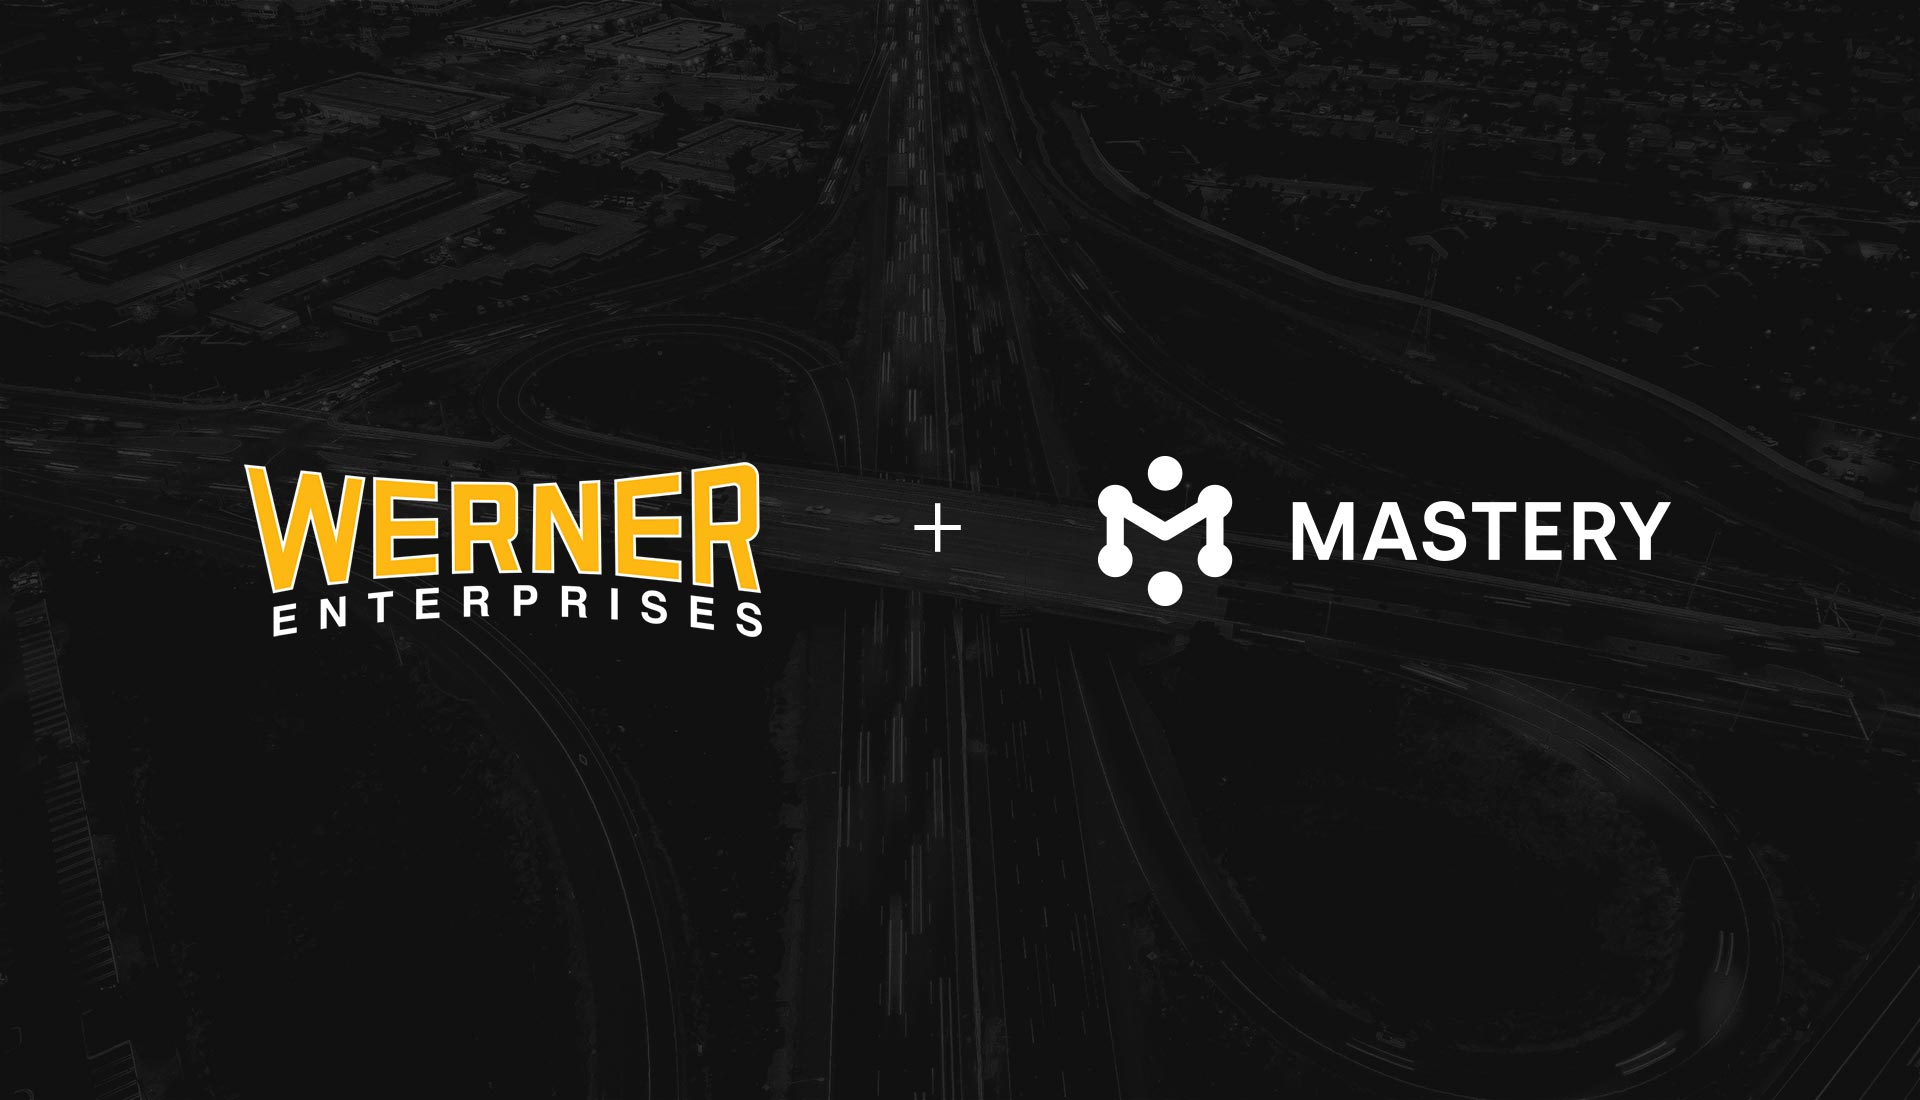 Werner Enterprises Announces Partnership With Mastery to Accelerate Supply Chain Automation, Visibility and Productivity